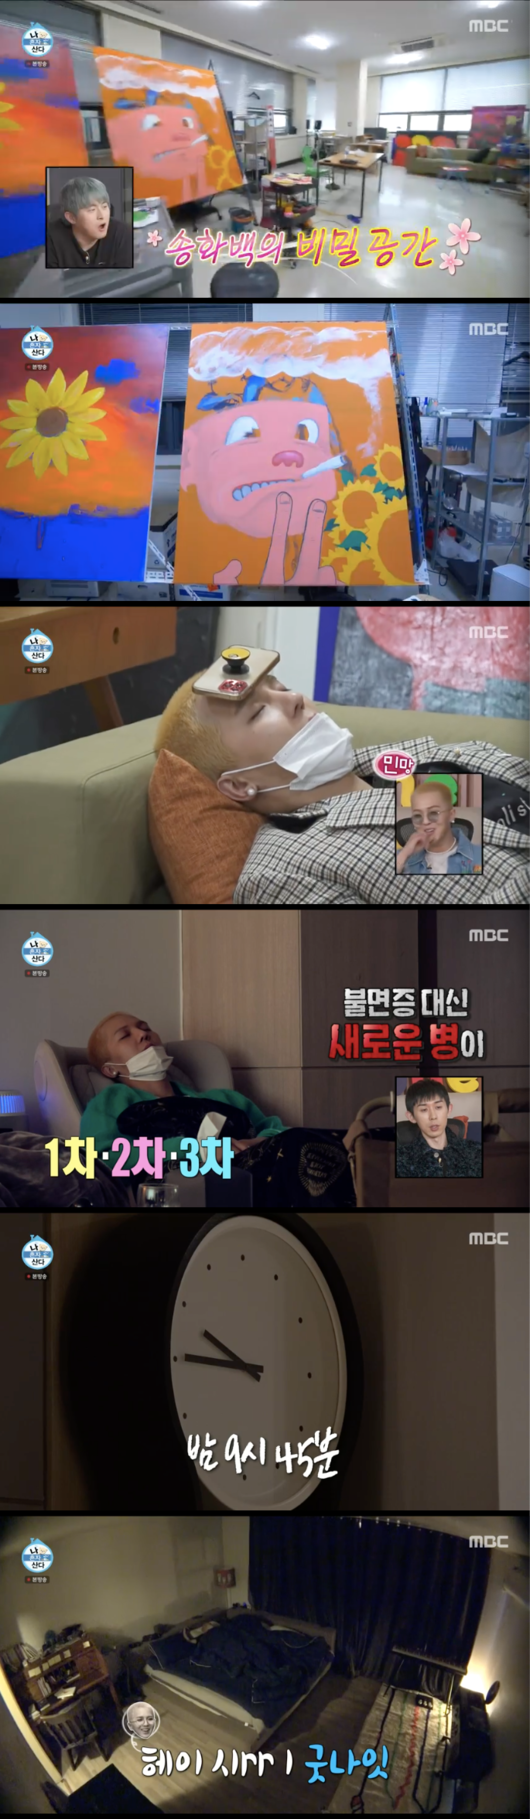 Song Min-ho, the live, released his companion Chippy.Song Min-ho appeared on MBCs I Alone Live, which aired at 11:10 p.m. on the 28th, and released the newly moved house.Ive been moving into my new home for about two months, and I dont have anything dynamic, but Im a cozy apartment Feelings, he said, introducing his home.After eating, Song Min-ho lay down in a massage chair and continued monitoring. Gian 84 said, In the old days, my aunt is like that when I go to Ulsans house.It was just such Feelings, said Song Min-ho, who was watching TV, fell asleep again in an hour of weather.I didnt sleep in Haru for more than four hours, I kept working and working, he said, so Code Kunst joked, Have you been sleeping?Song Min-ho, who opened his eyes for a while, moved to his seat on the sofa and fell asleep again, and Jun Hyun-moo laughed, This is a long time since I have been sleeping.Song Min-hos dress room, which is known as a fashionista in the entertainment industry, was also unveiled. Trend-sensitive man Jun Hyun-moo expressed interest in I should look at the closet.Dressed, Song Min-ho headed downstairs and to another house with a laundry; the members were amazed, saying, Do you have two houses? And Song Min-ho said, Its the house where my mother and sister live.I have been living away for nearly 10 years, so it is good to stay with my family in a close place.I live on the same east and downstairs, he said.On the day of the broadcast, Song Min-hos companion Chippy was released.Appearing in a brilliant emerald figure, Chiffey caught her eye with a mysterious charm, including kissing Song Min-ho; he said: Im raising a parrot.He is a biblical parrot and is about two years old. He is a second-class internationally endangered species and is being raised with the permission of the state. He is the smartest friend of small parrots.I have intelligence about three years old. I also say hello. But Chiffey did not answer Song Min-hos greetings; Song Min-ho persuaded Chiffey to say you can do it, but the answer did not return.Song Min-hos obsession with the table, Chippy looked at the toilet and expressed his intention to refuse, and Song Min-ho said, I think Im in bad shape today.I am good at greeting you. Chippi showed a personal period climbing up Song Min-hos glasses, but he did not answer Song Min-hos greetings at the end.Song Min-ho, who arrived at the workshop for the painting work on the day, lay down on the couch after work and went to sleep.Code Kunst, who saw this, laughed, worried that Is not it a new disease instead of insomnia?After finishing his work, Song Min-ho stopped at the mart and bought meat for dinner and went home; he enjoyed a leisurely evening with kimchi and whiskey on a whole pork belly.Song Min-ho, who enjoyed a lot of second meals, did not open Facing Windows and smoked an insense stick.Ju-seung Lee, who saw this, worried about him, saying, I should open Facing Windows. Jun Hyun-moo said, There is a reason for sleepiness.Thats why Im so dazed all day. I have to ventilate.Song Min-ho went to bed early at 9.45pm and finished Haru with a conversation with artificial intelligence speakers.MBC I Live Alone broadcast screen capture